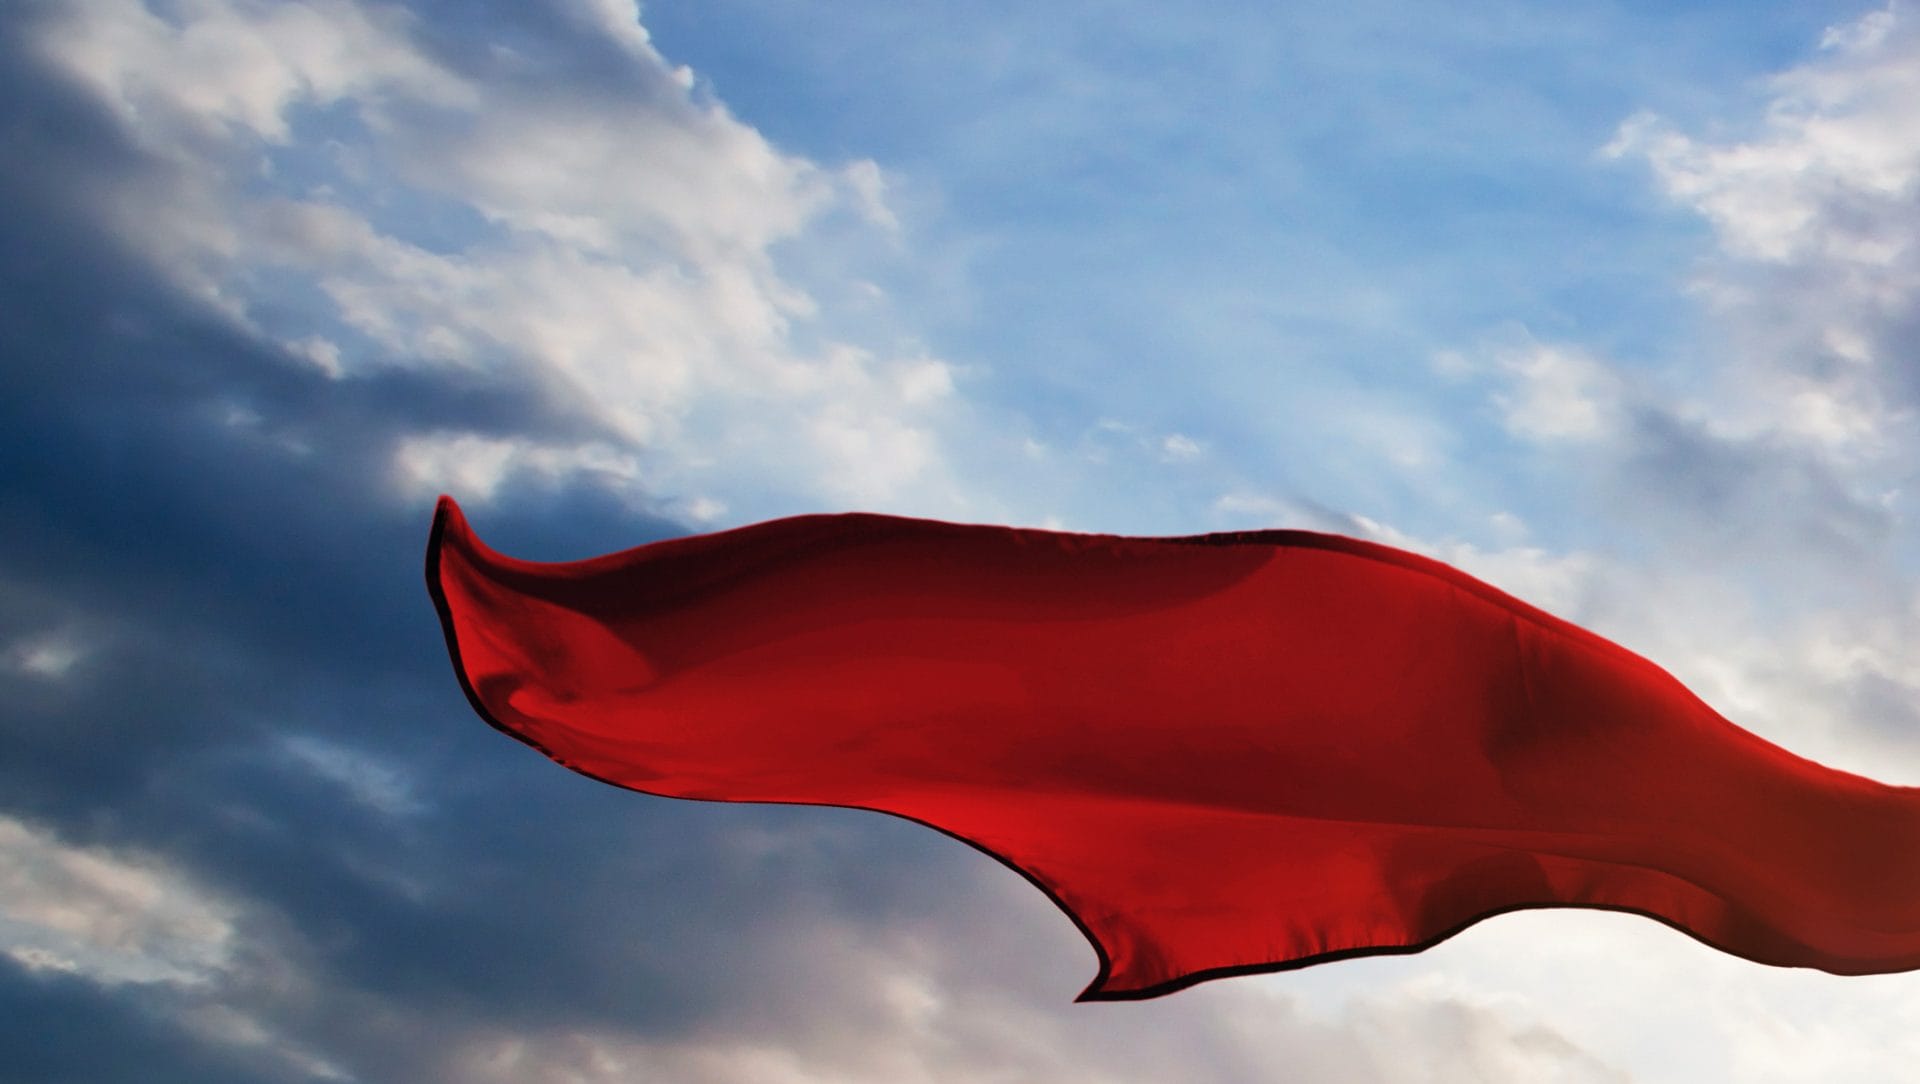 Why You Aren’t Using Your Greatest Superpower